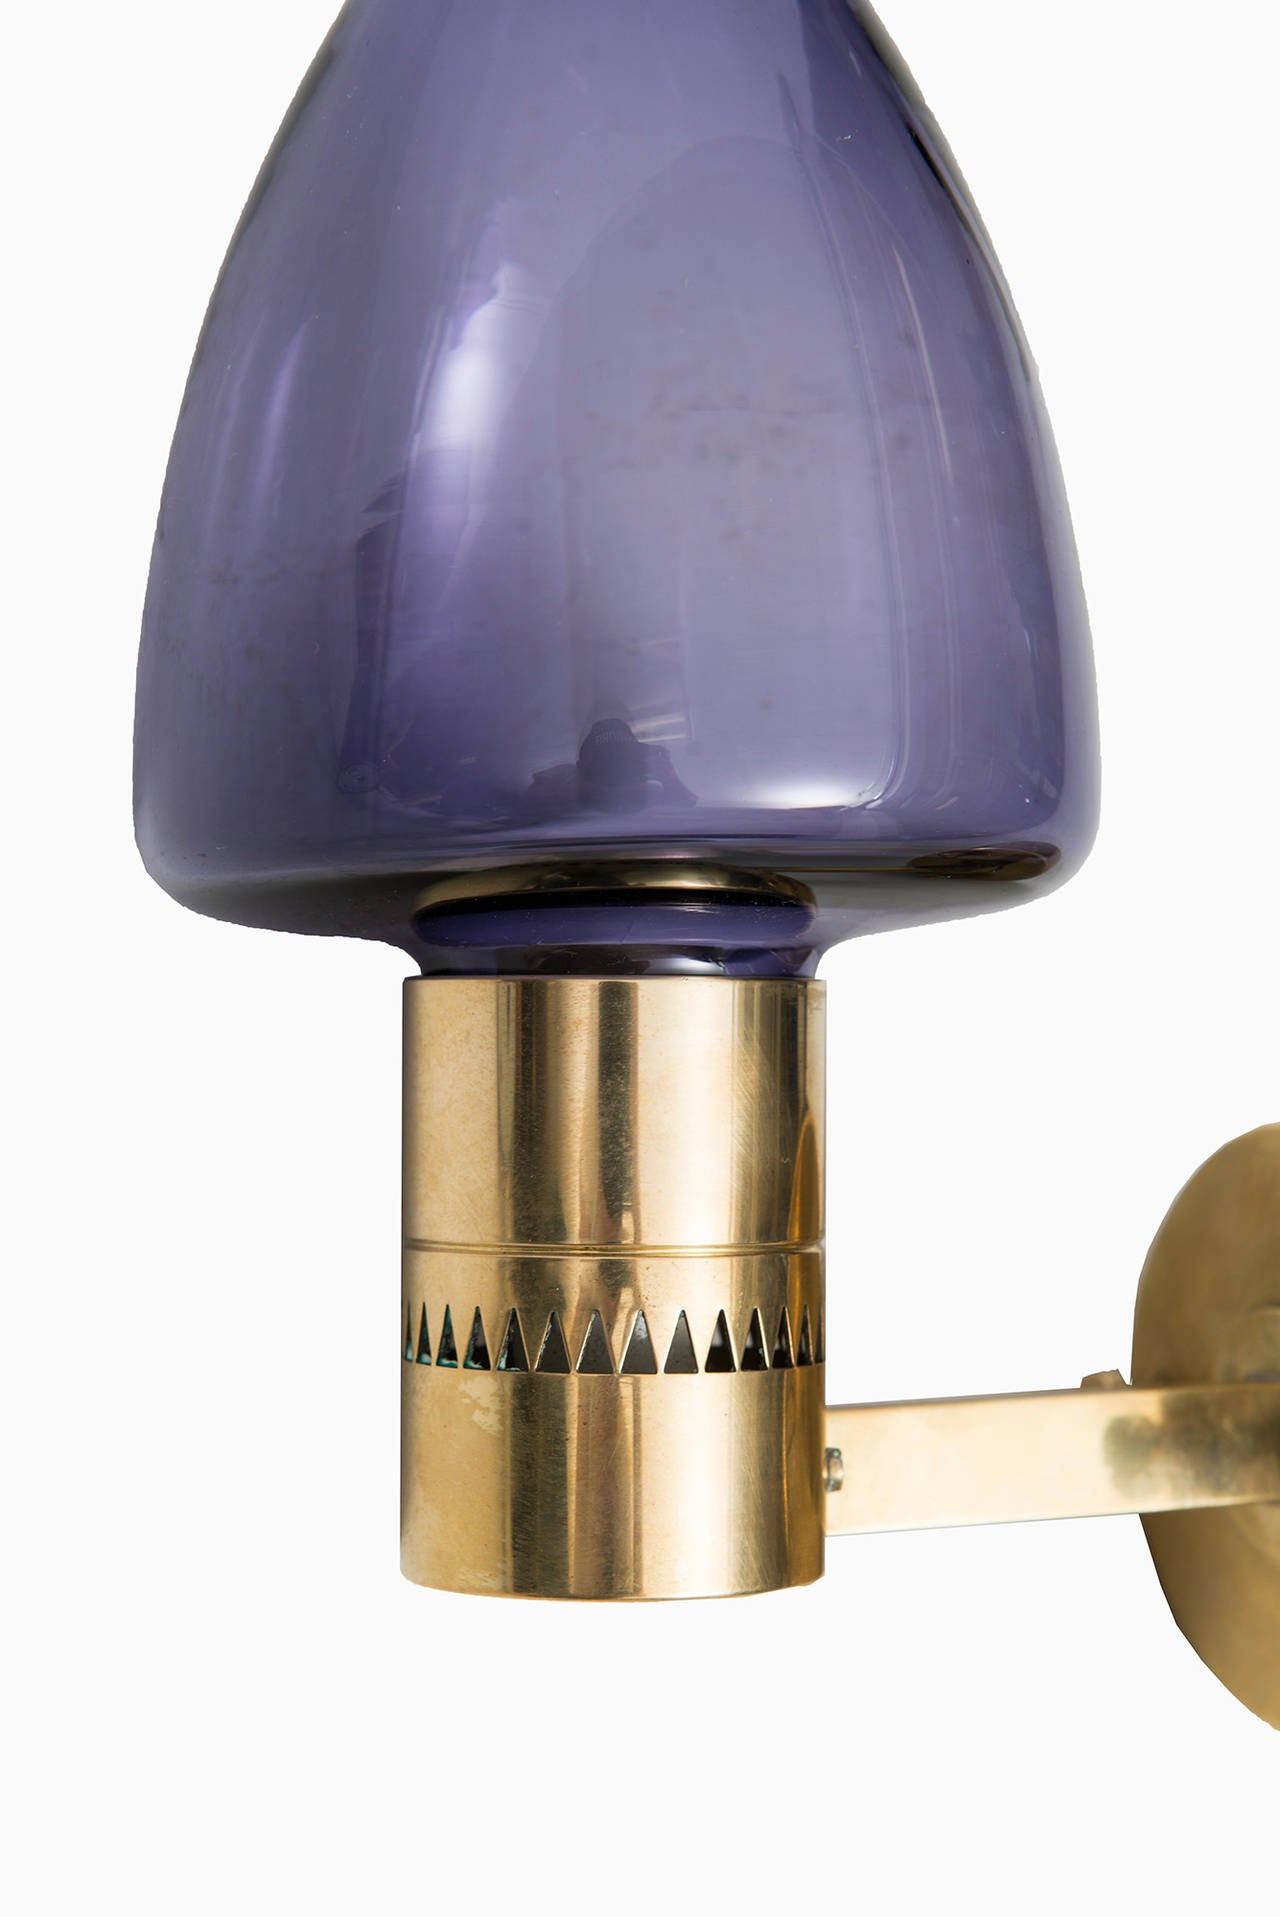 A pair of wall lamps in brass and purple glass designed by Hans-Agne Jakobsson. Produced by Hans-Agne Jakobsson in Markaryd, Sweden.